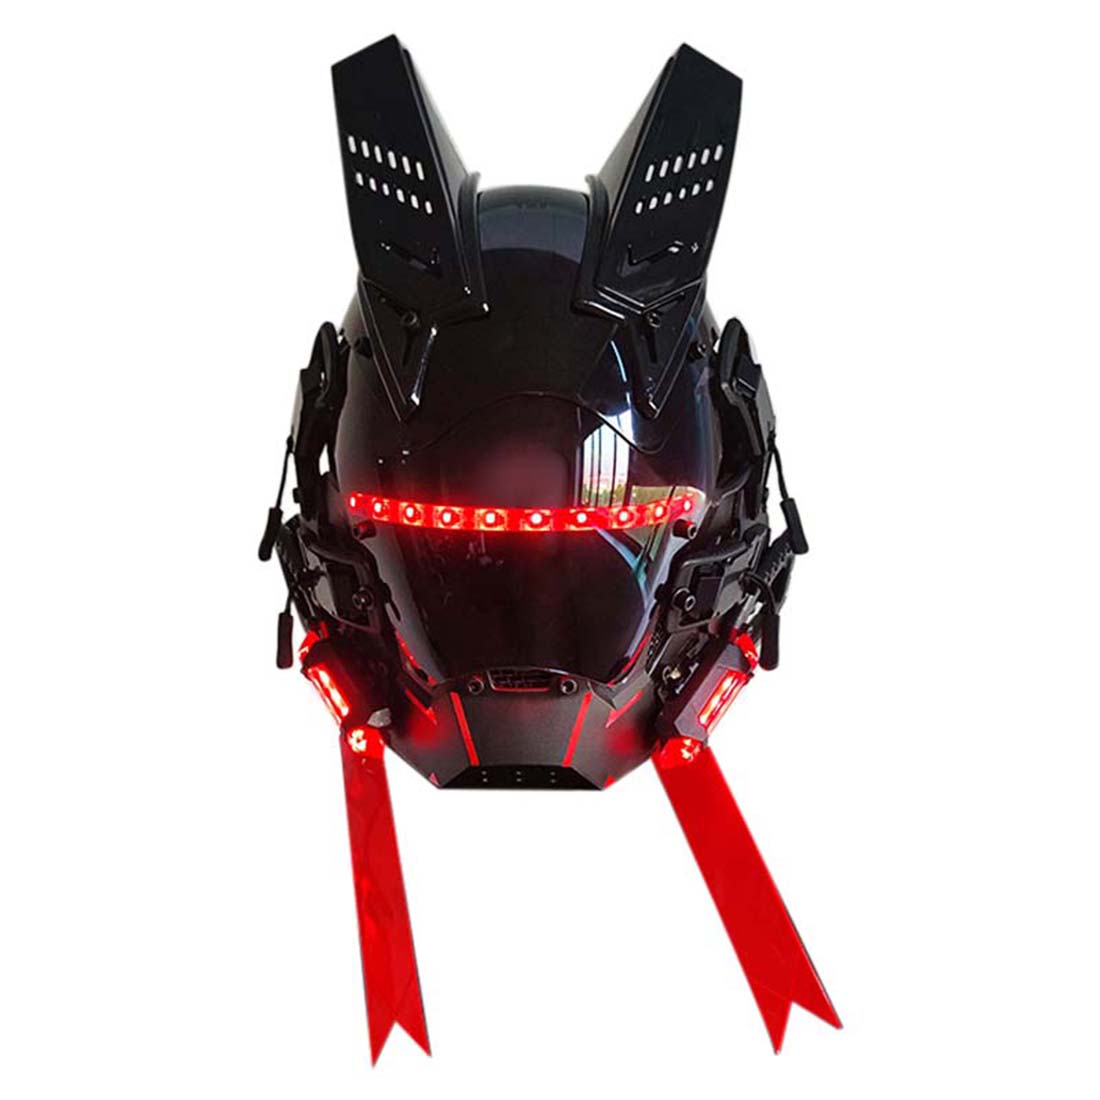 Punk Helmet Mask with Blue LED Light Cosplay Costume Props for Adults